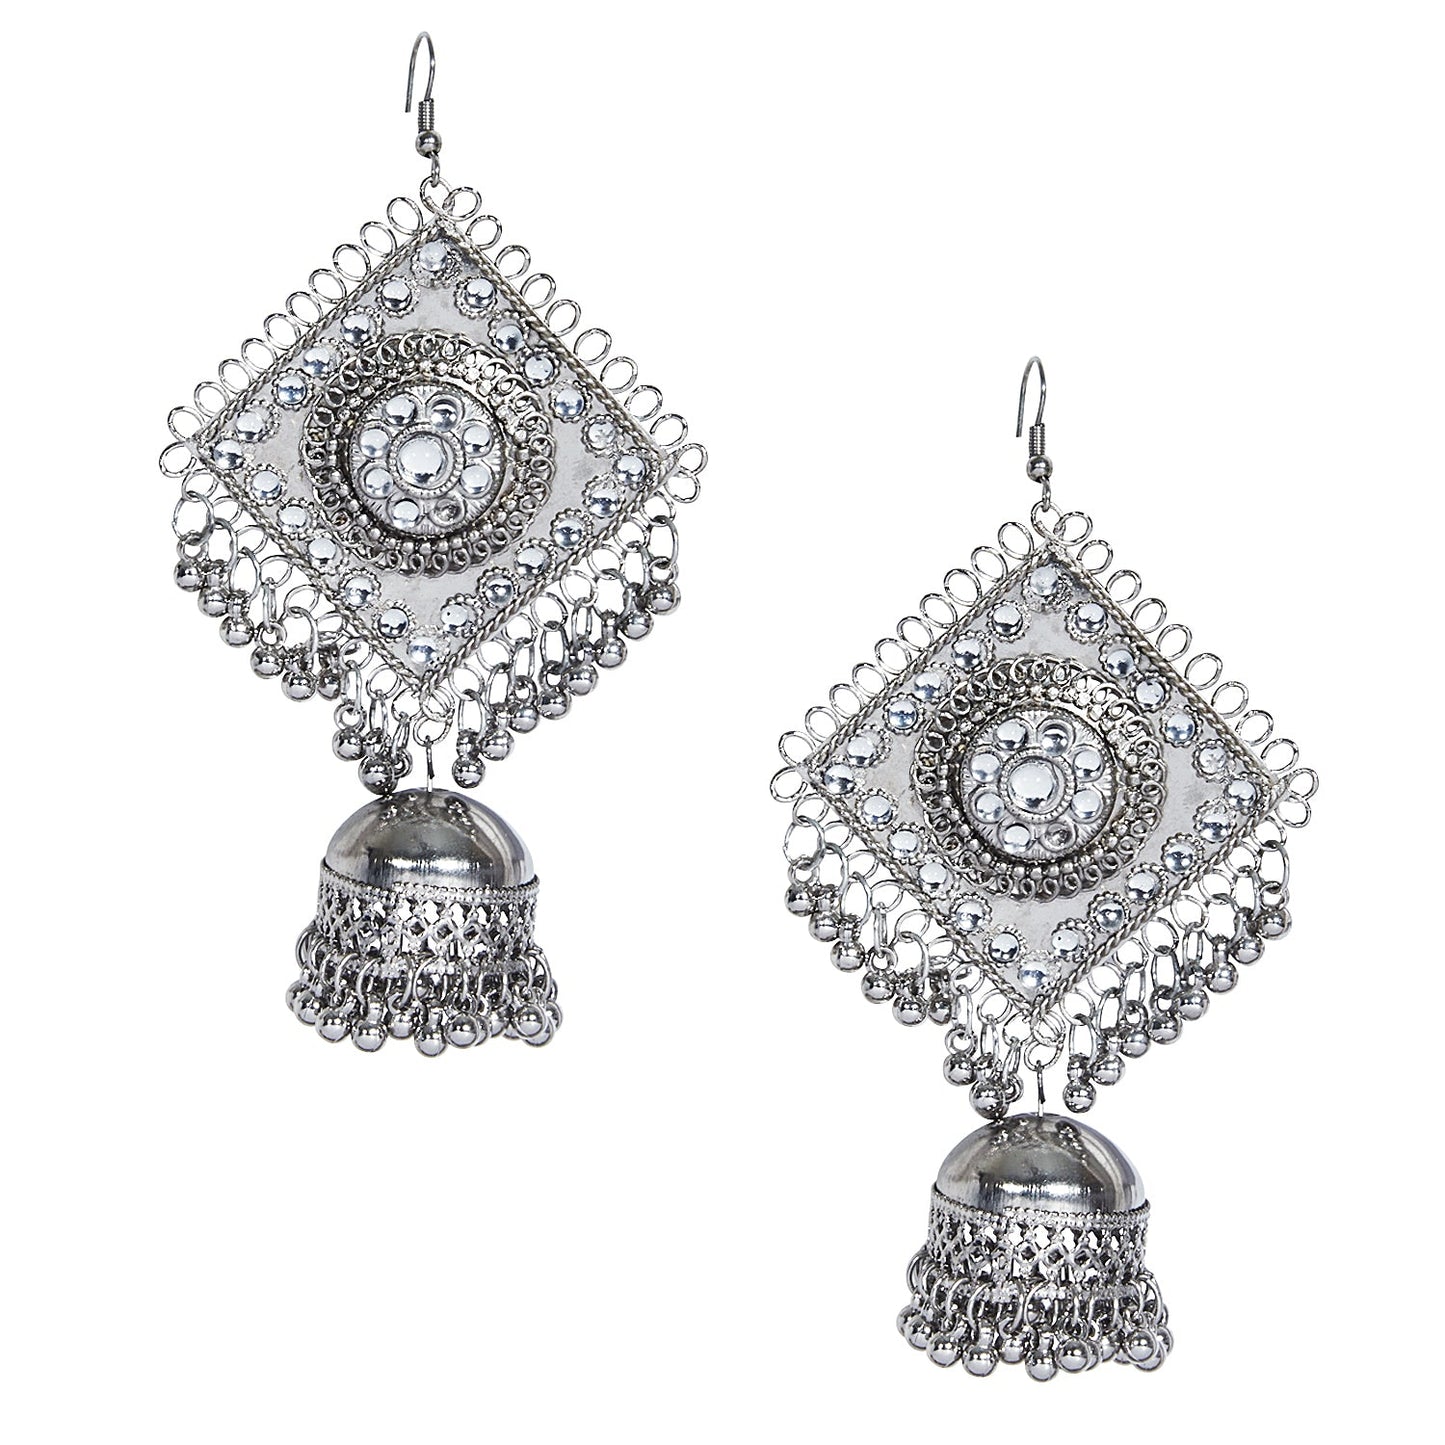 Shining Jewel Antique Oxidised Silver Big Jhumka Earrings with Crystals for Women & Girls (SJ_1845)